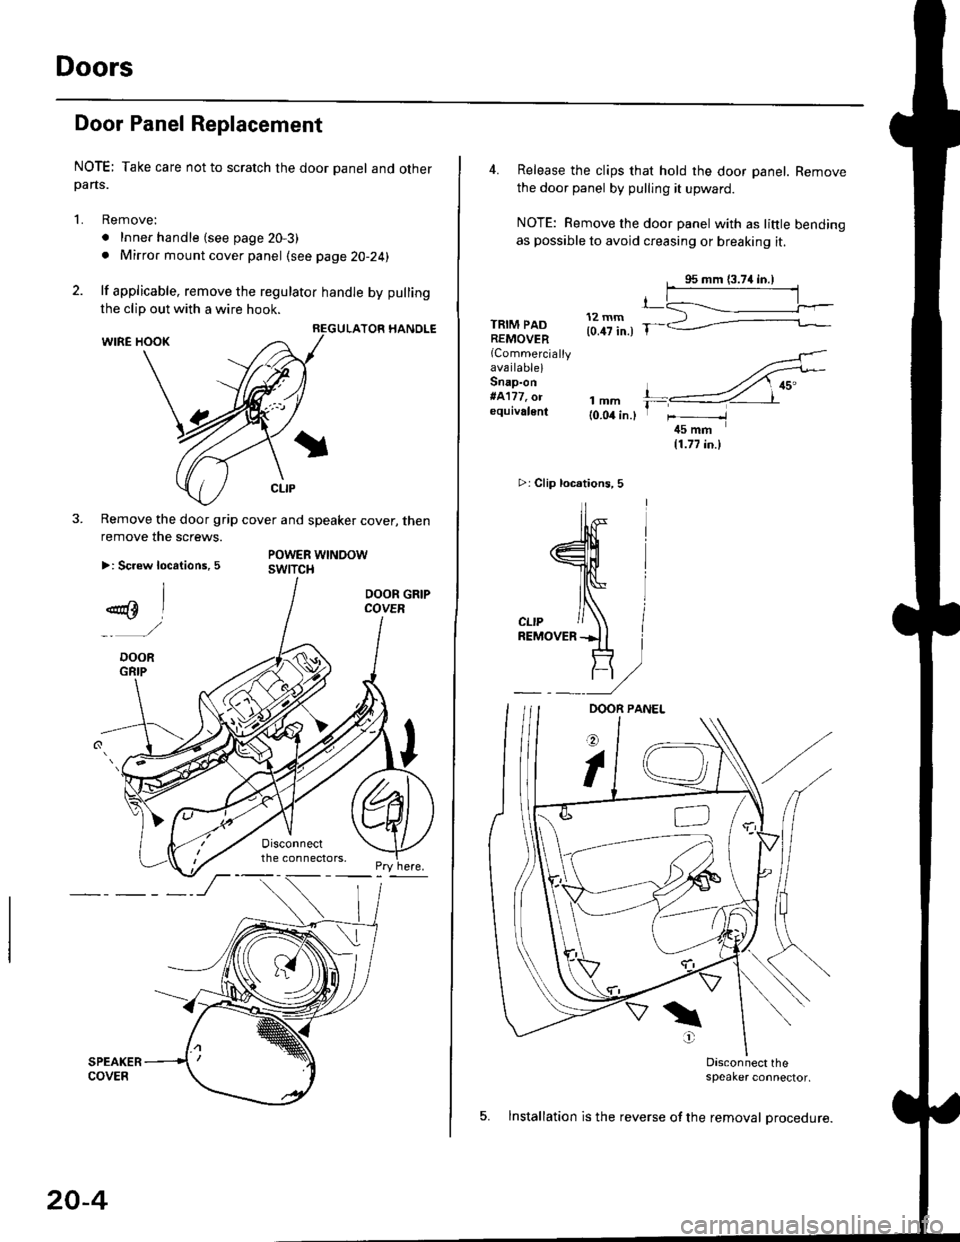 HONDA CIVIC 1997 6.G Workshop Manual Doors
Door Panel Replacement
NOTE; Take care not to scratch the door panel and otherpans.
1. Remove:
. Inner handle (see page 20-3)
. Mirror mount cover panel (see page 20-24)
2. lf applicable, remove